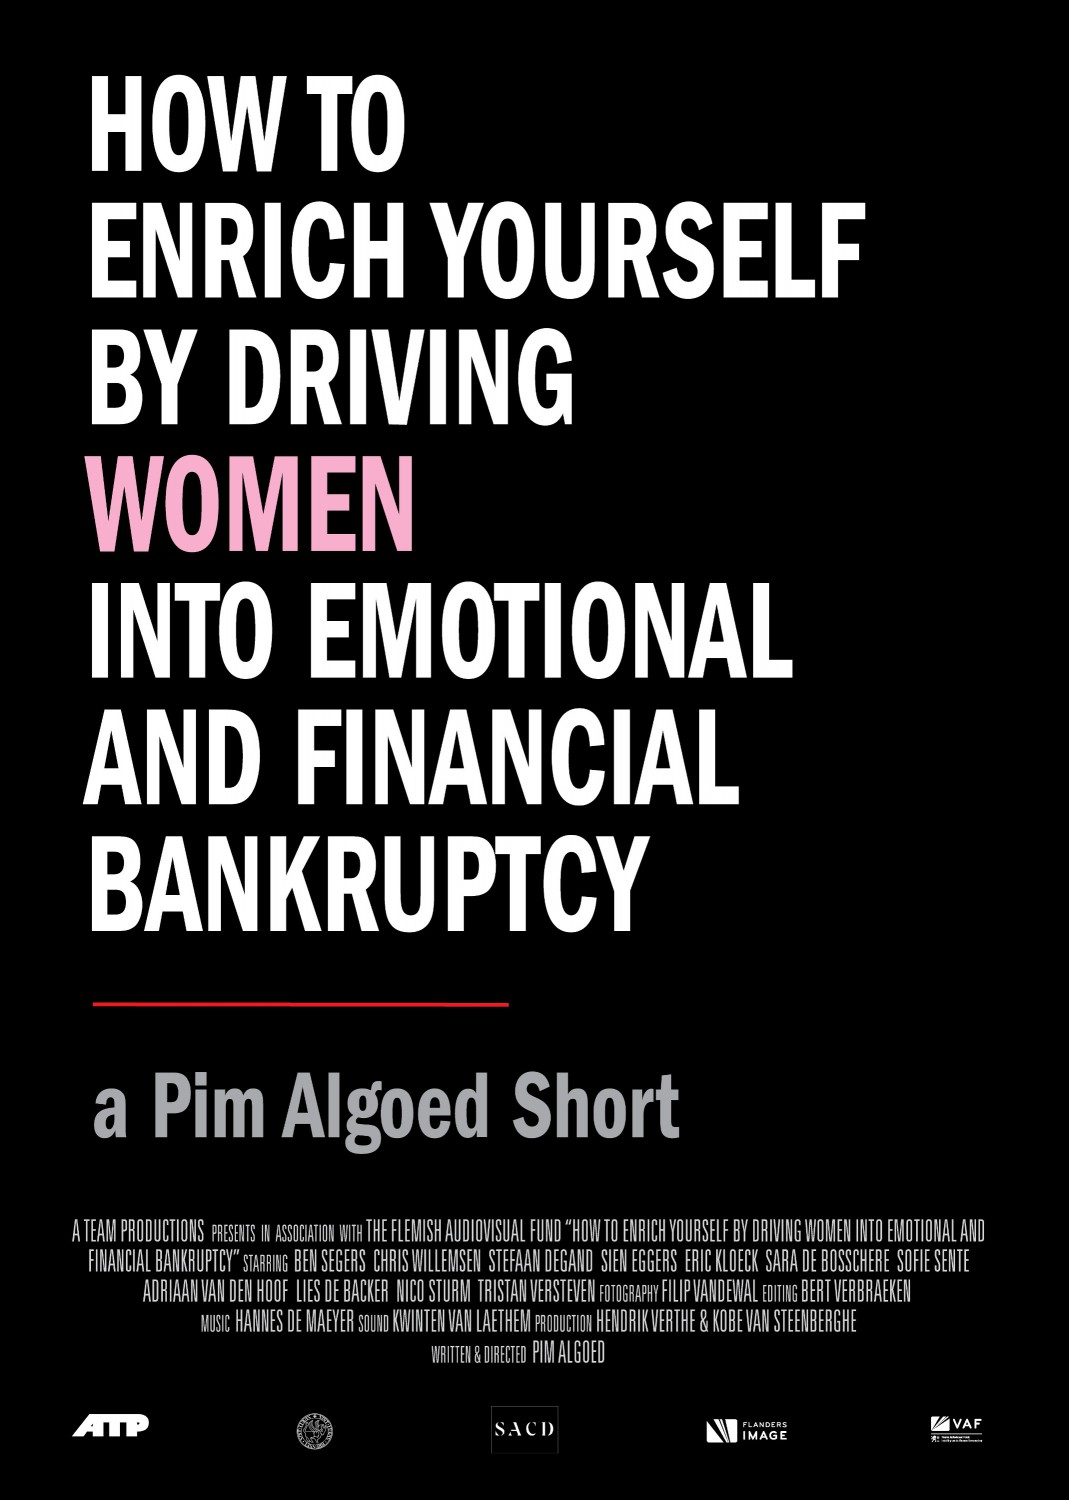 Extra Large Movie Poster Image for How to Enrich Yourself by Driving Women Into Emotional and Financial Bankruptcy